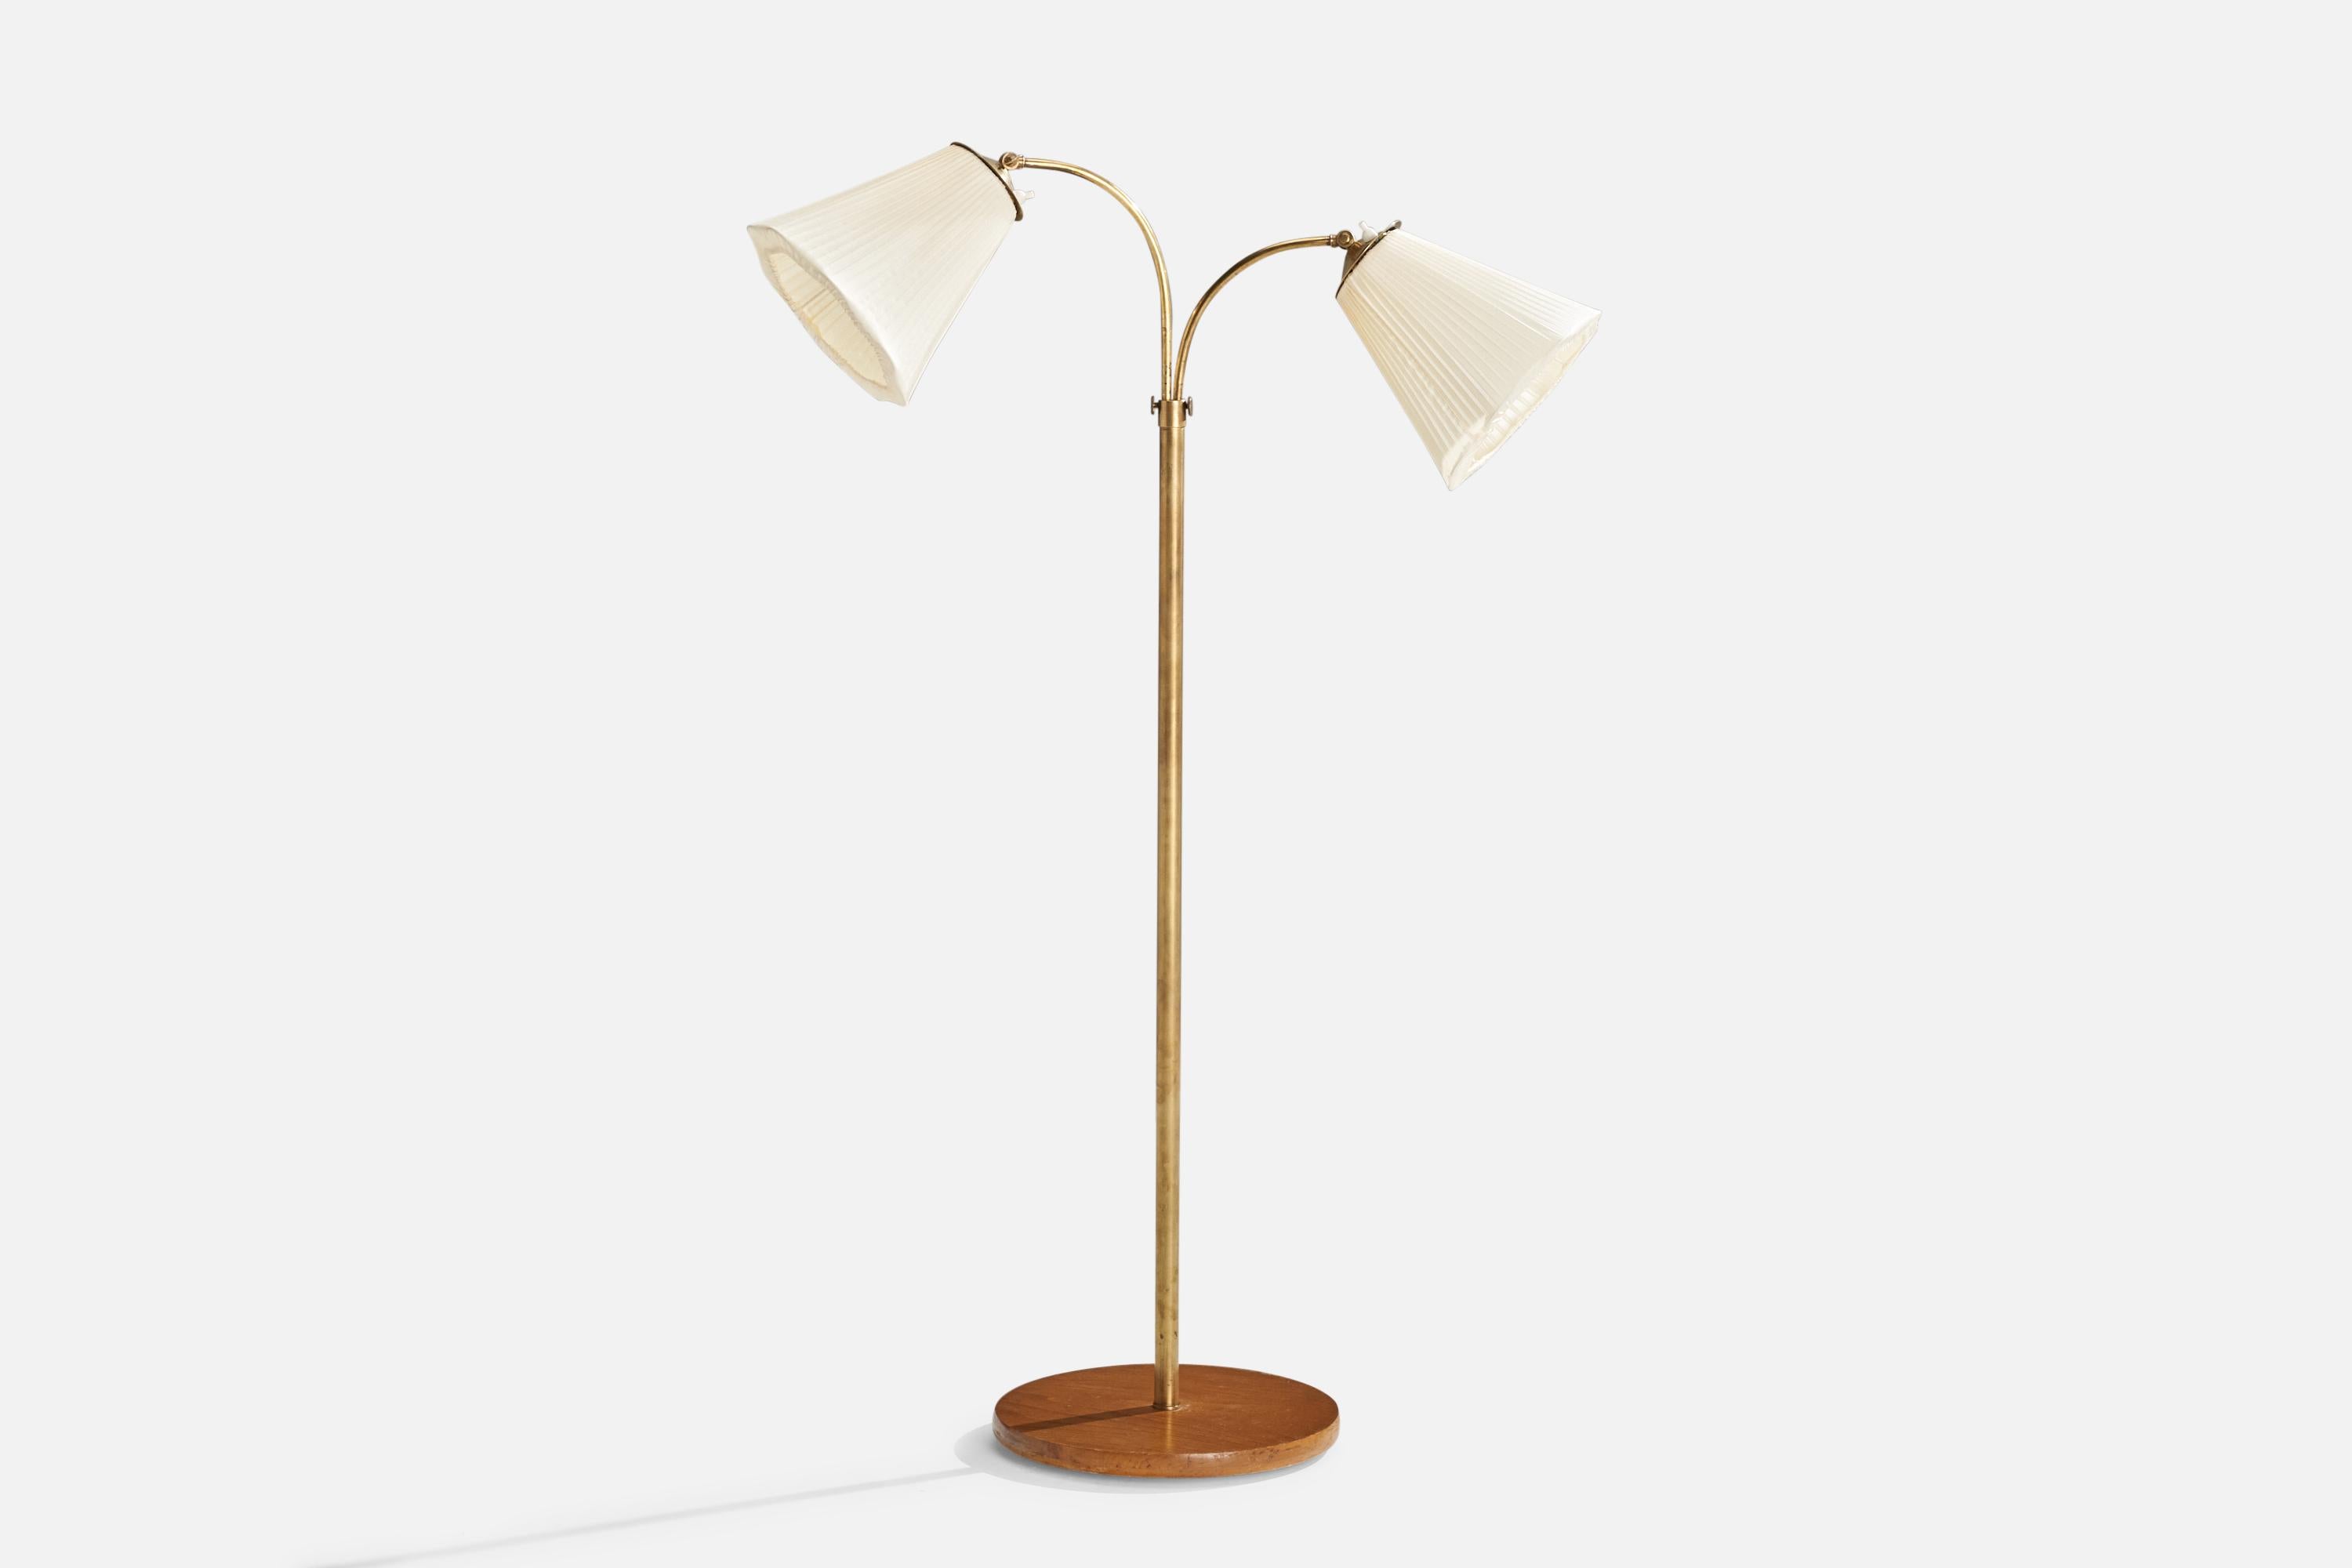 A brass, elm and off-white fabric floor lamp designed and produced in Sweden, c. 1940s.

Dimensions variable
Overall Dimensions (inches): 50” H x 33” W x 11.25” D
Stated dimensions include shade.
Bulb Specifications: E-26 Bulb
Number of Sockets: